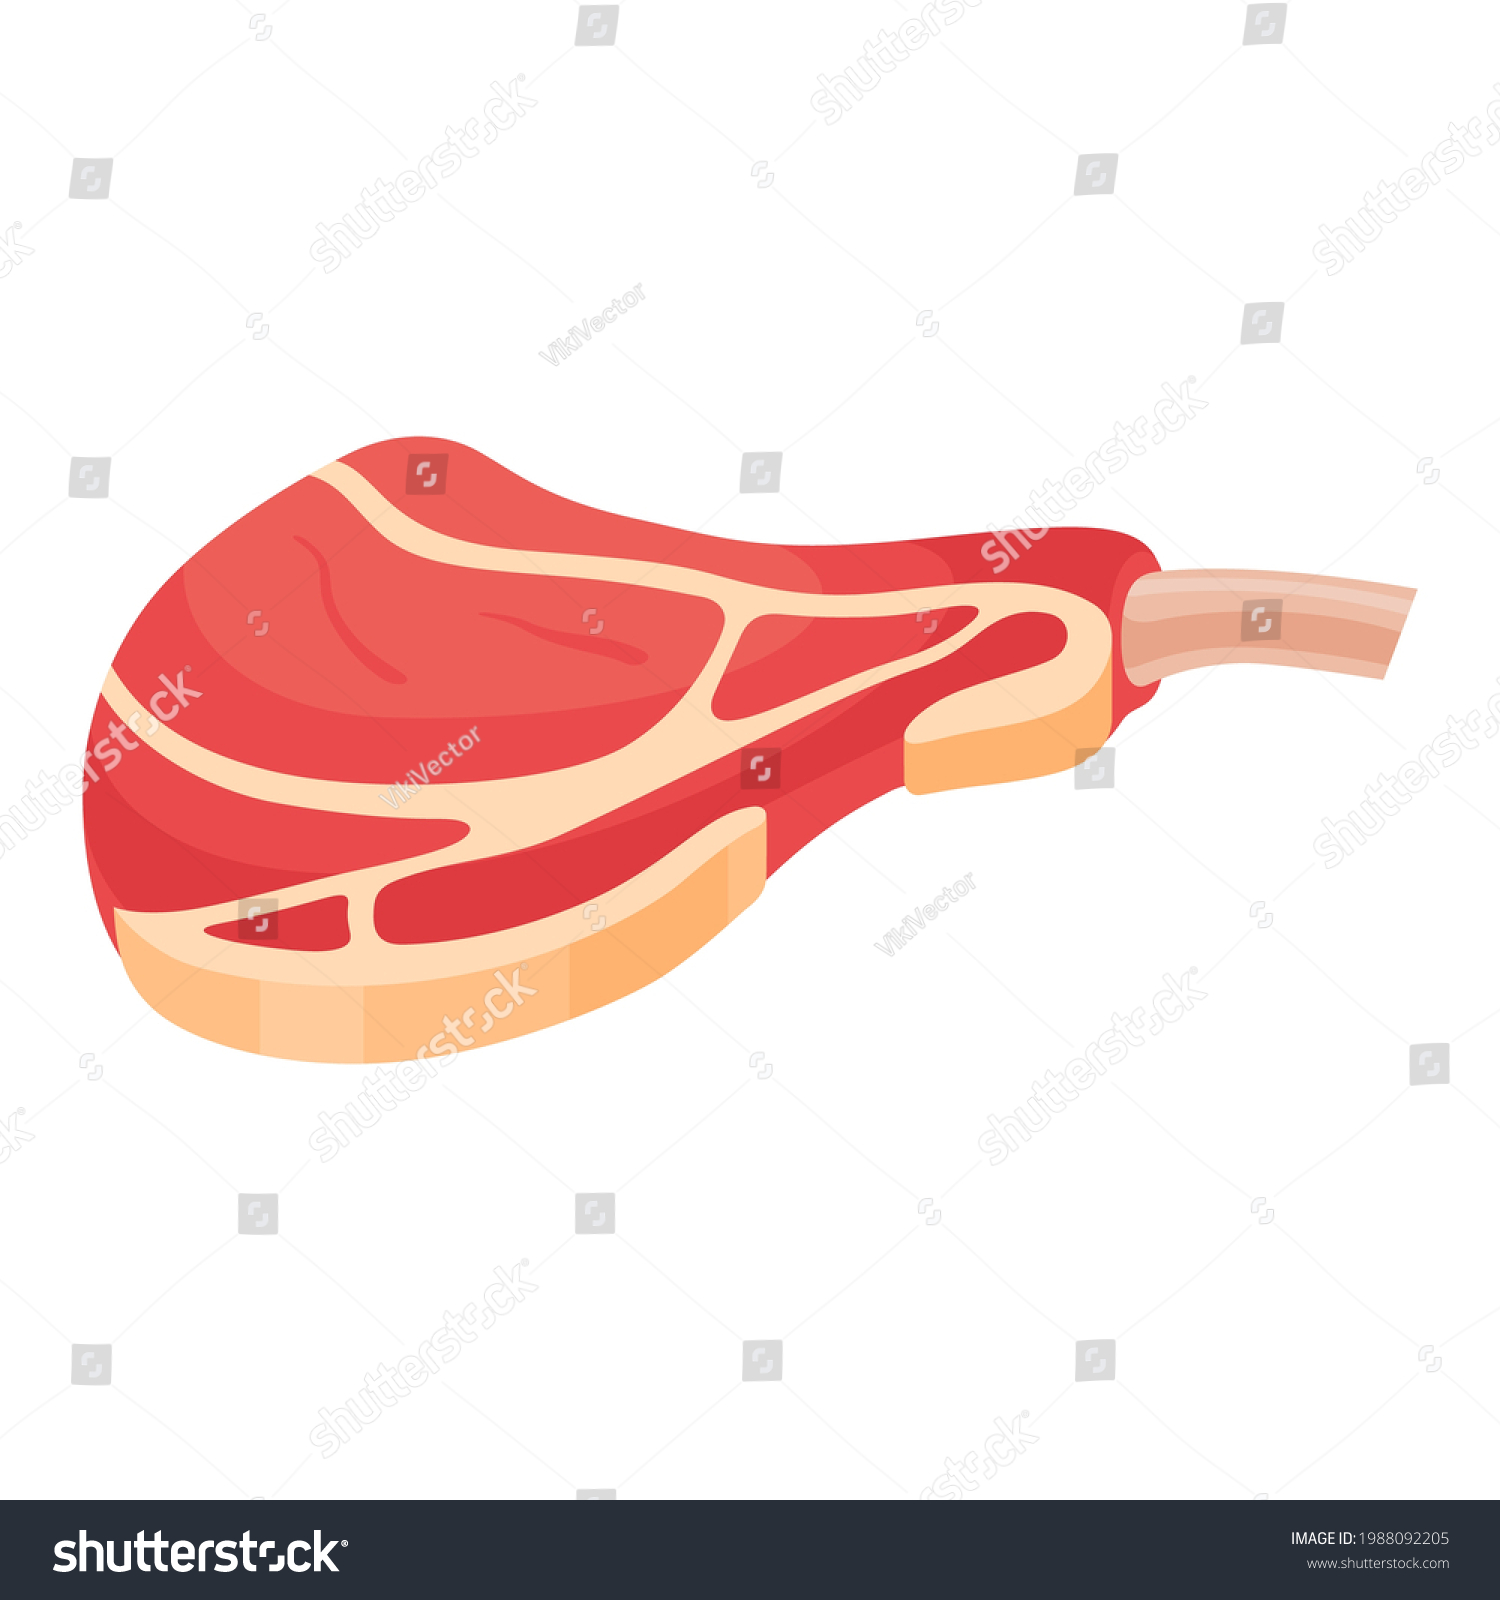 Beef on the bone cartoon icon. Raw meaty piece for roasting, grilling, frying. Fresh cattle, veal steak clipart. Butchery, farm product. Vector illustration isolated on white background. #1988092205